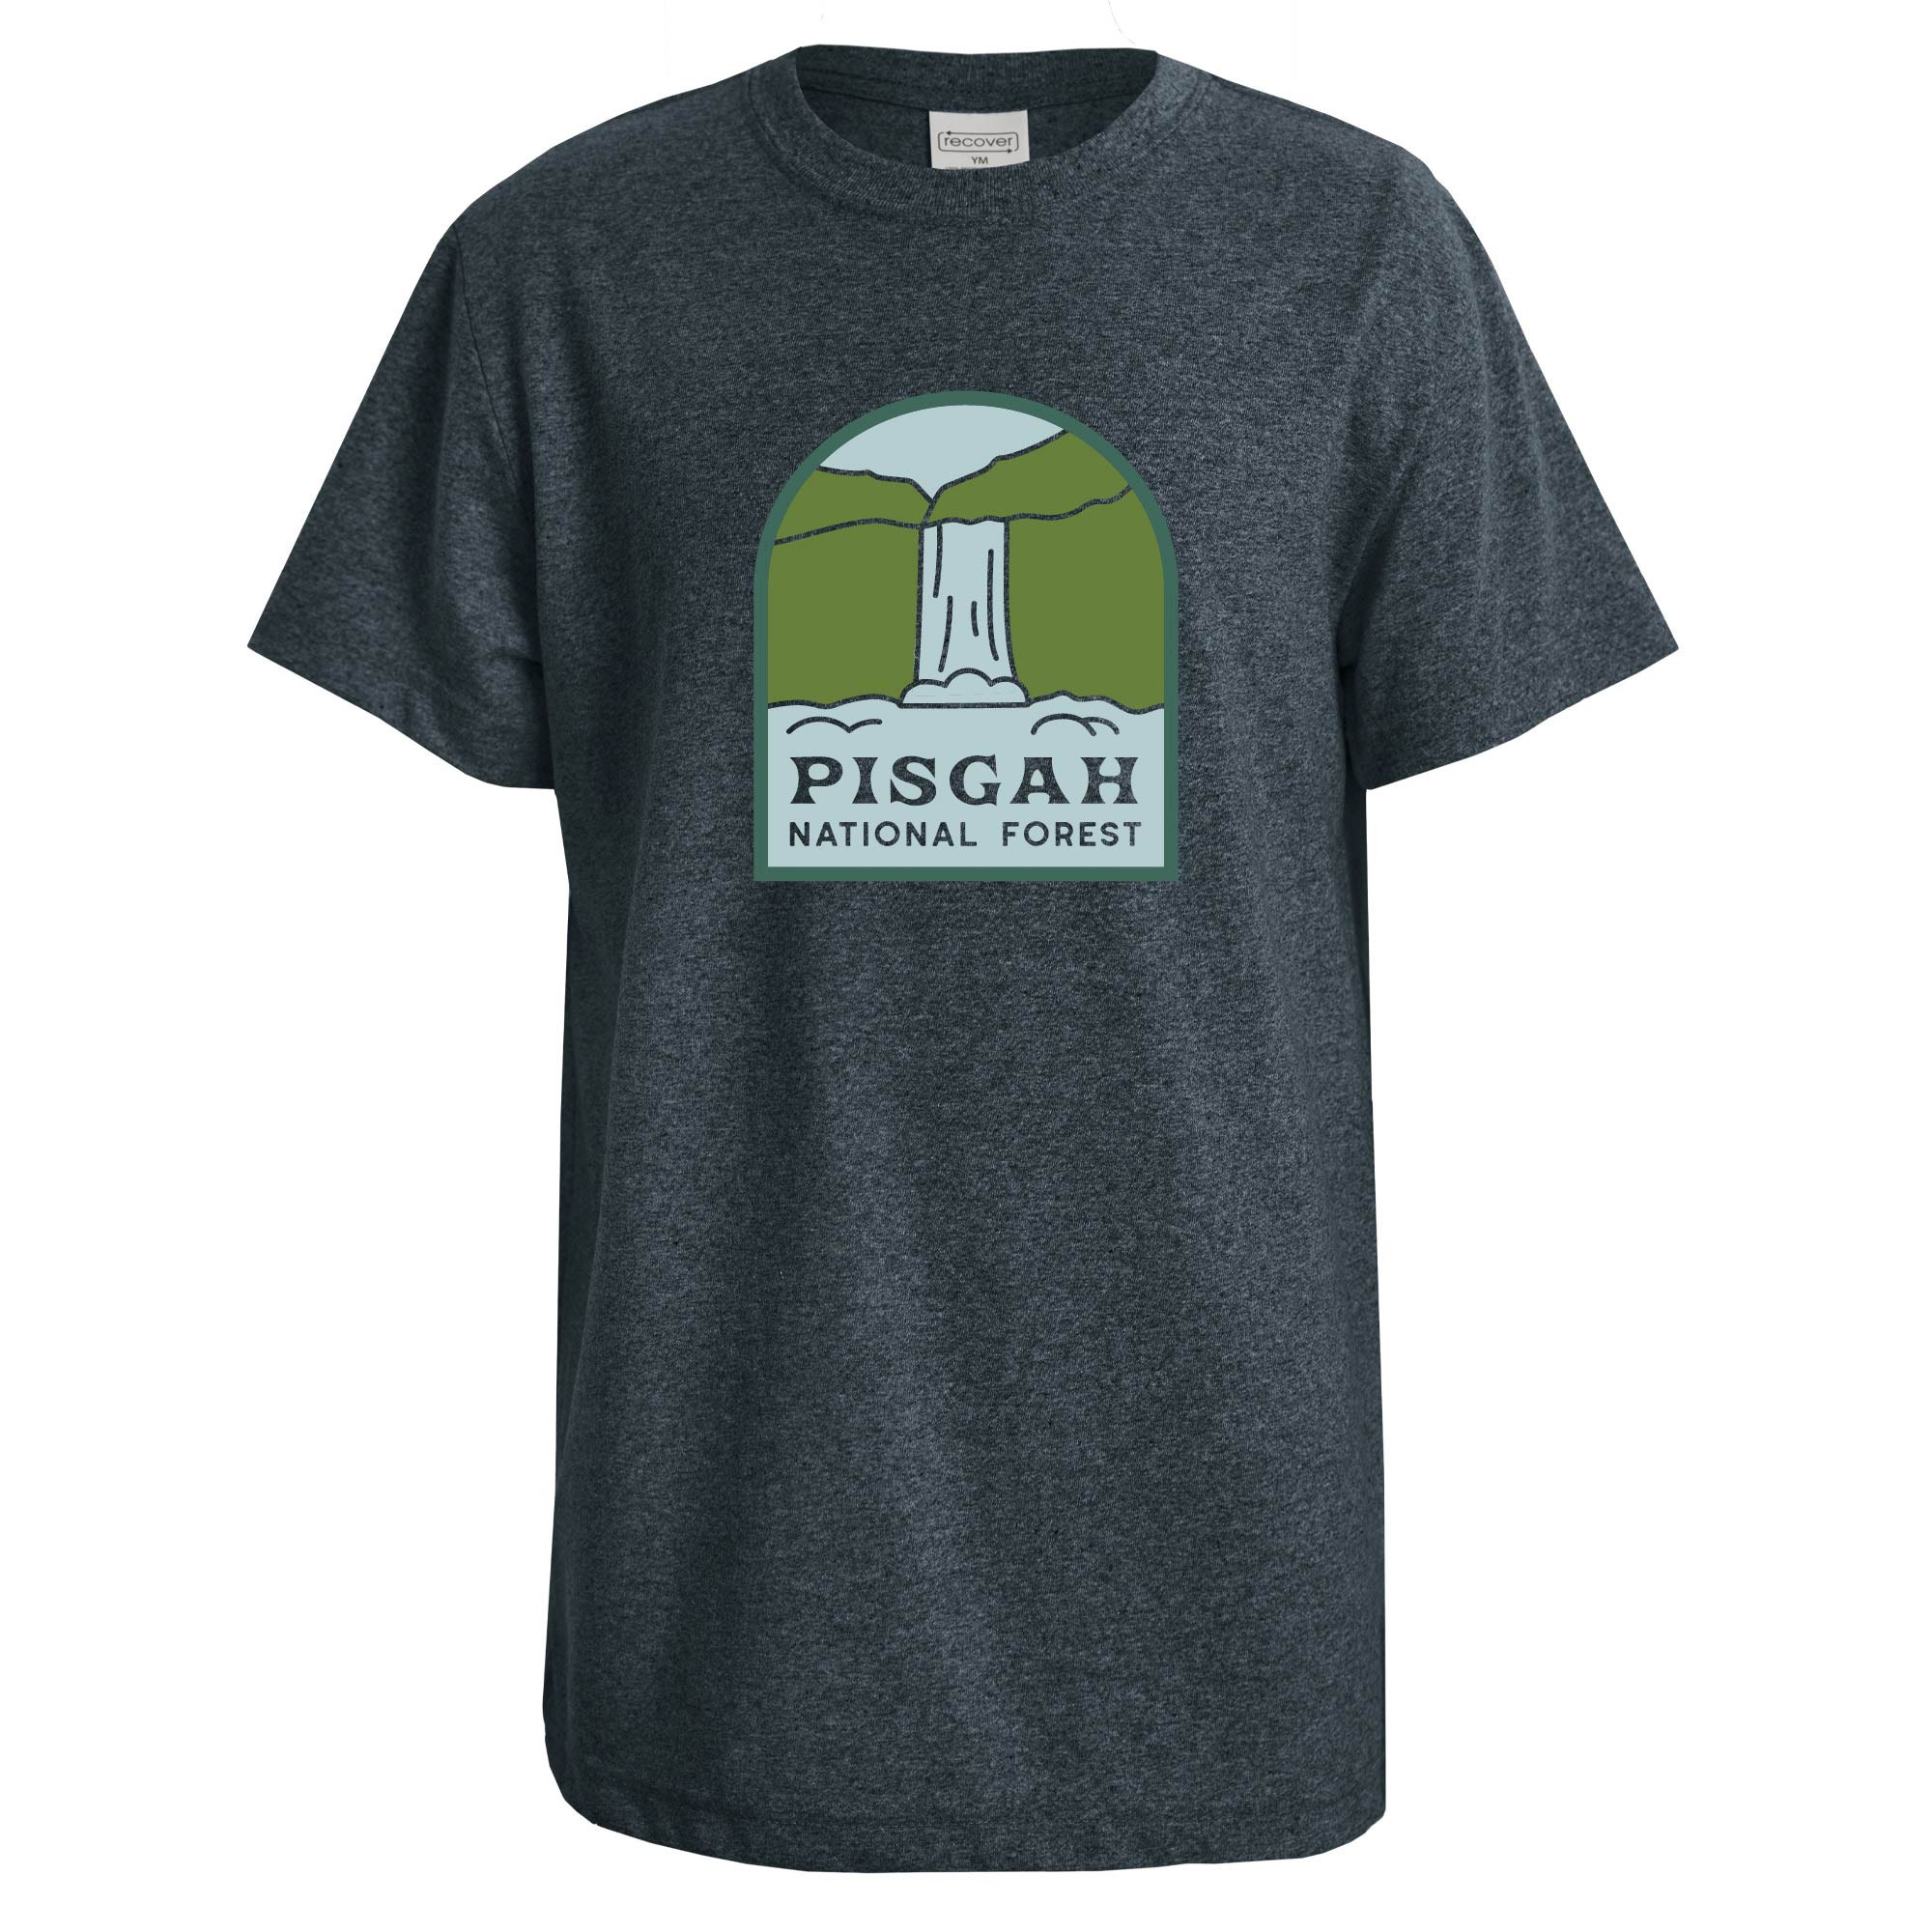 RY100 - Youth Pisgah National Forest Short Sleeve T-Shirt